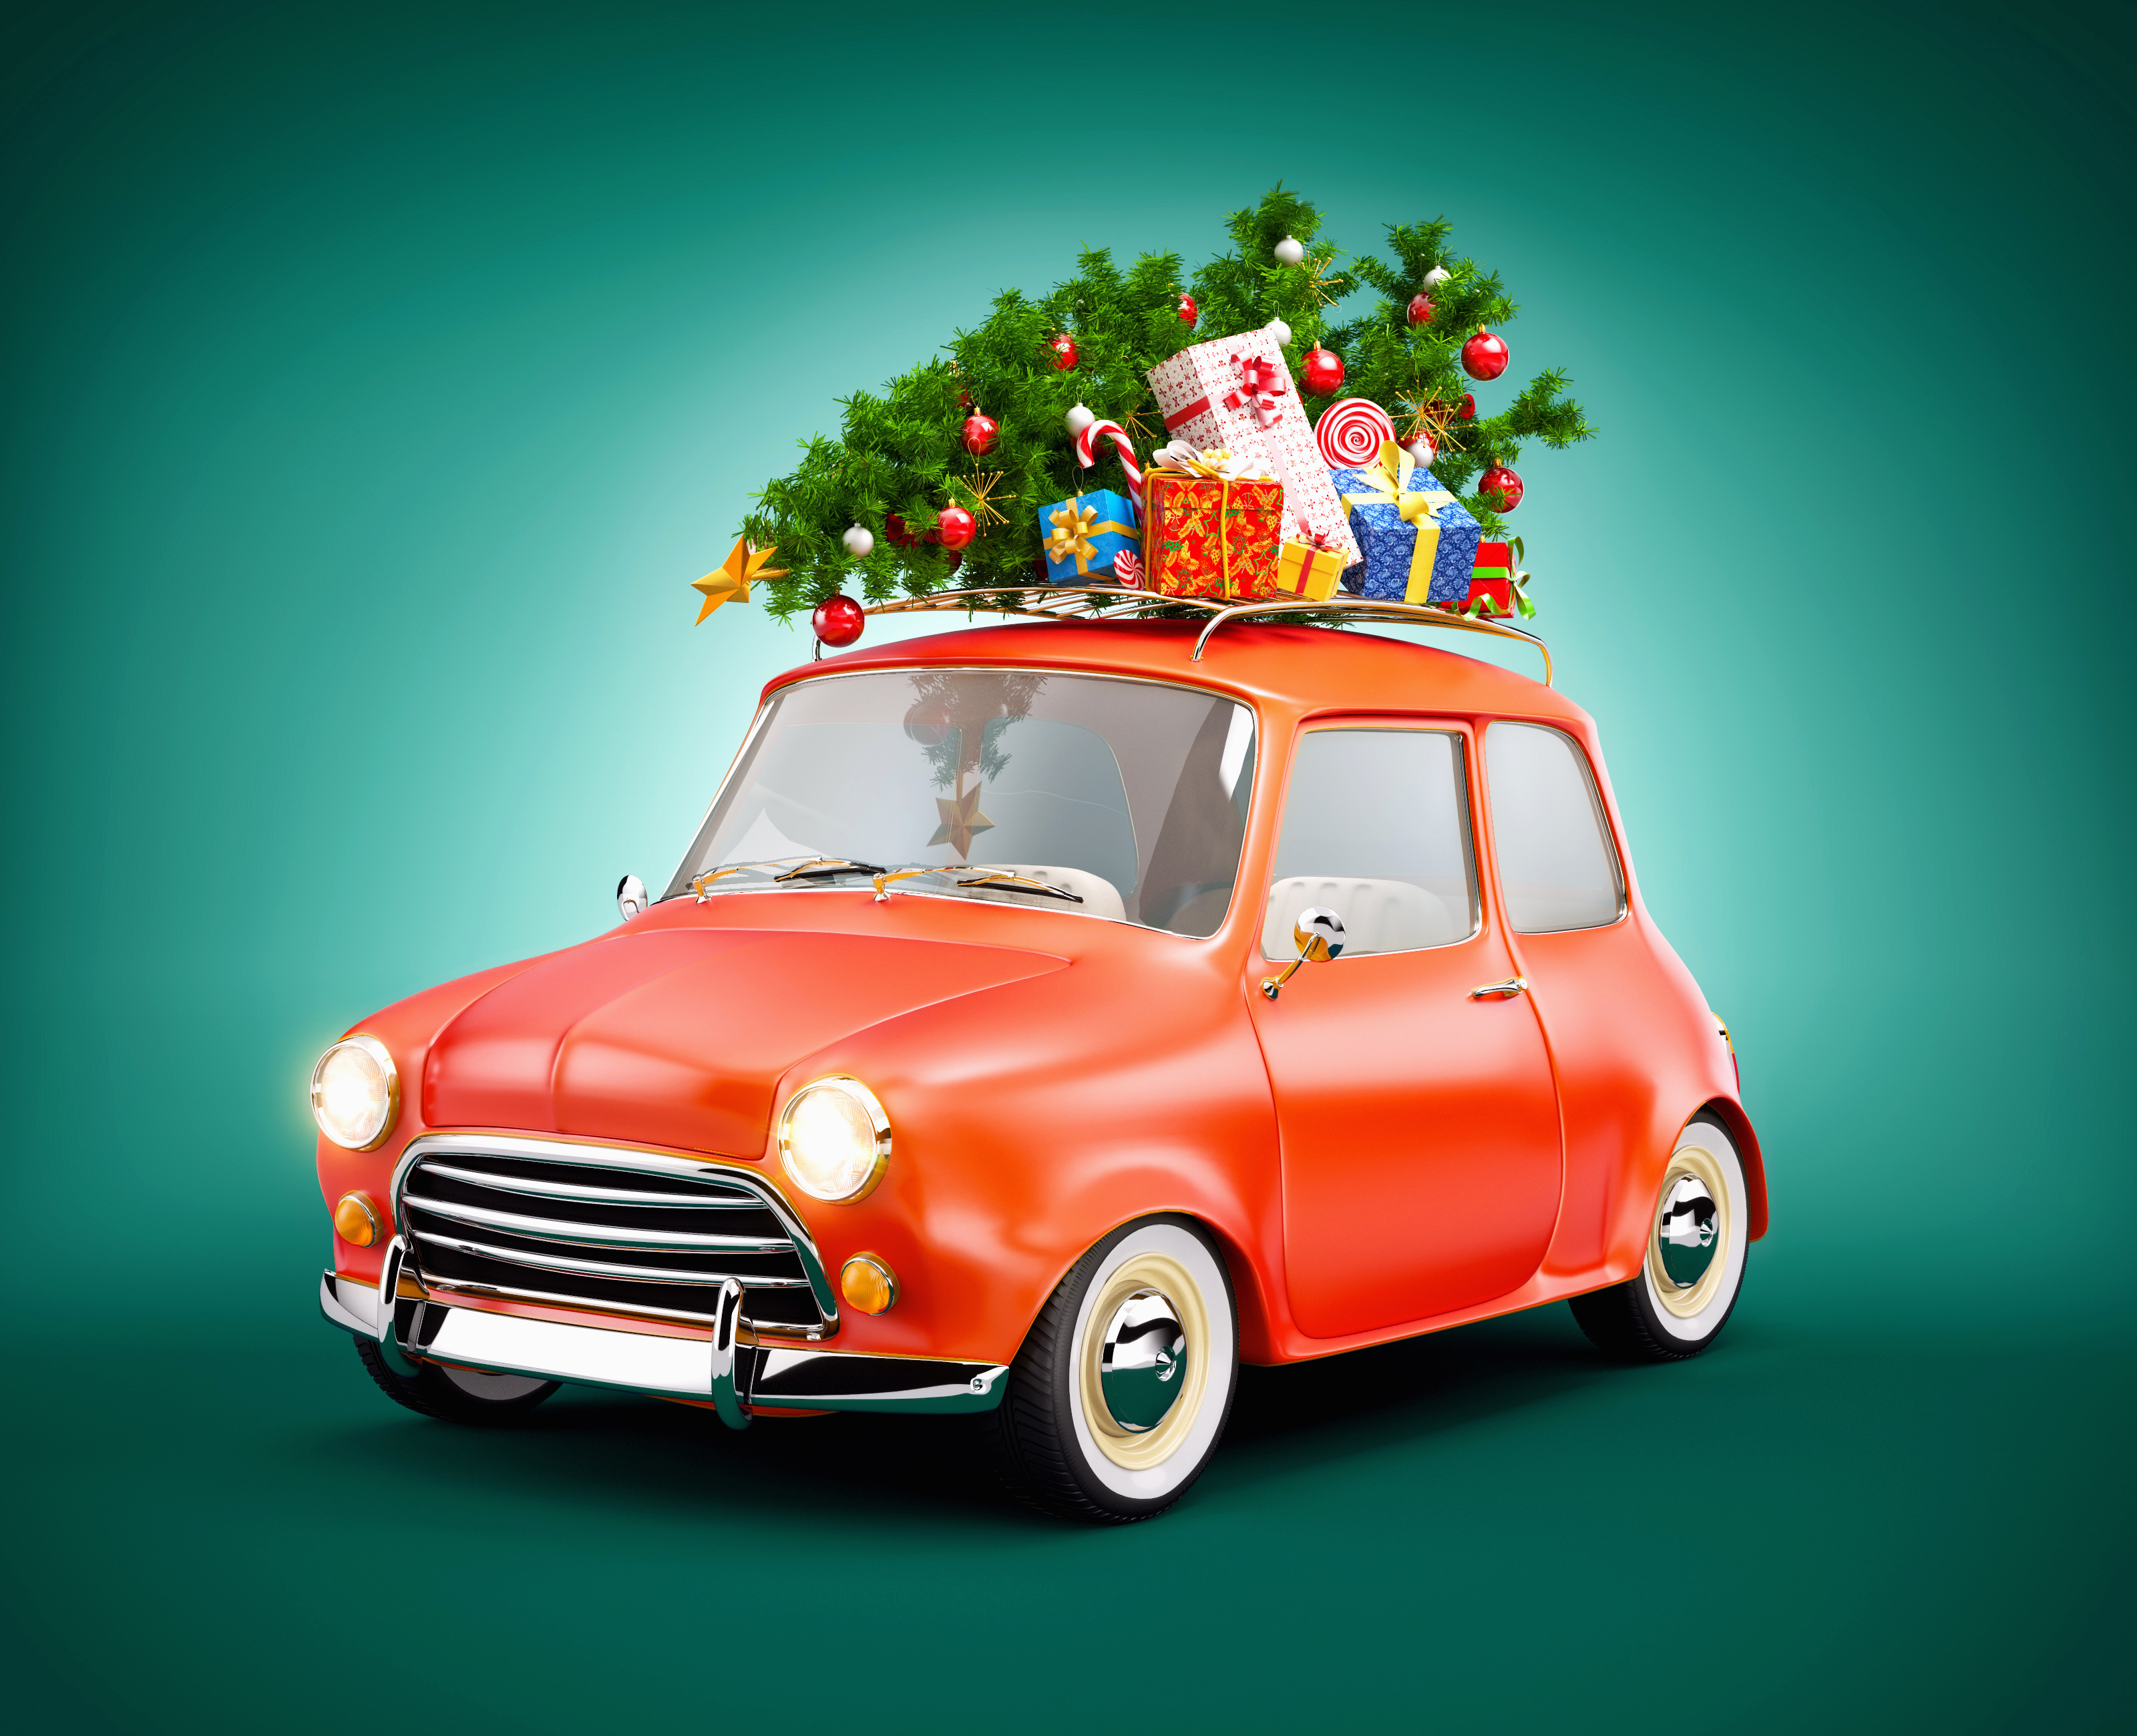 Wallpaper New year Christmas tree Gifts Cars Colored background 3200x2600 Christmas New Year tree present auto automobile